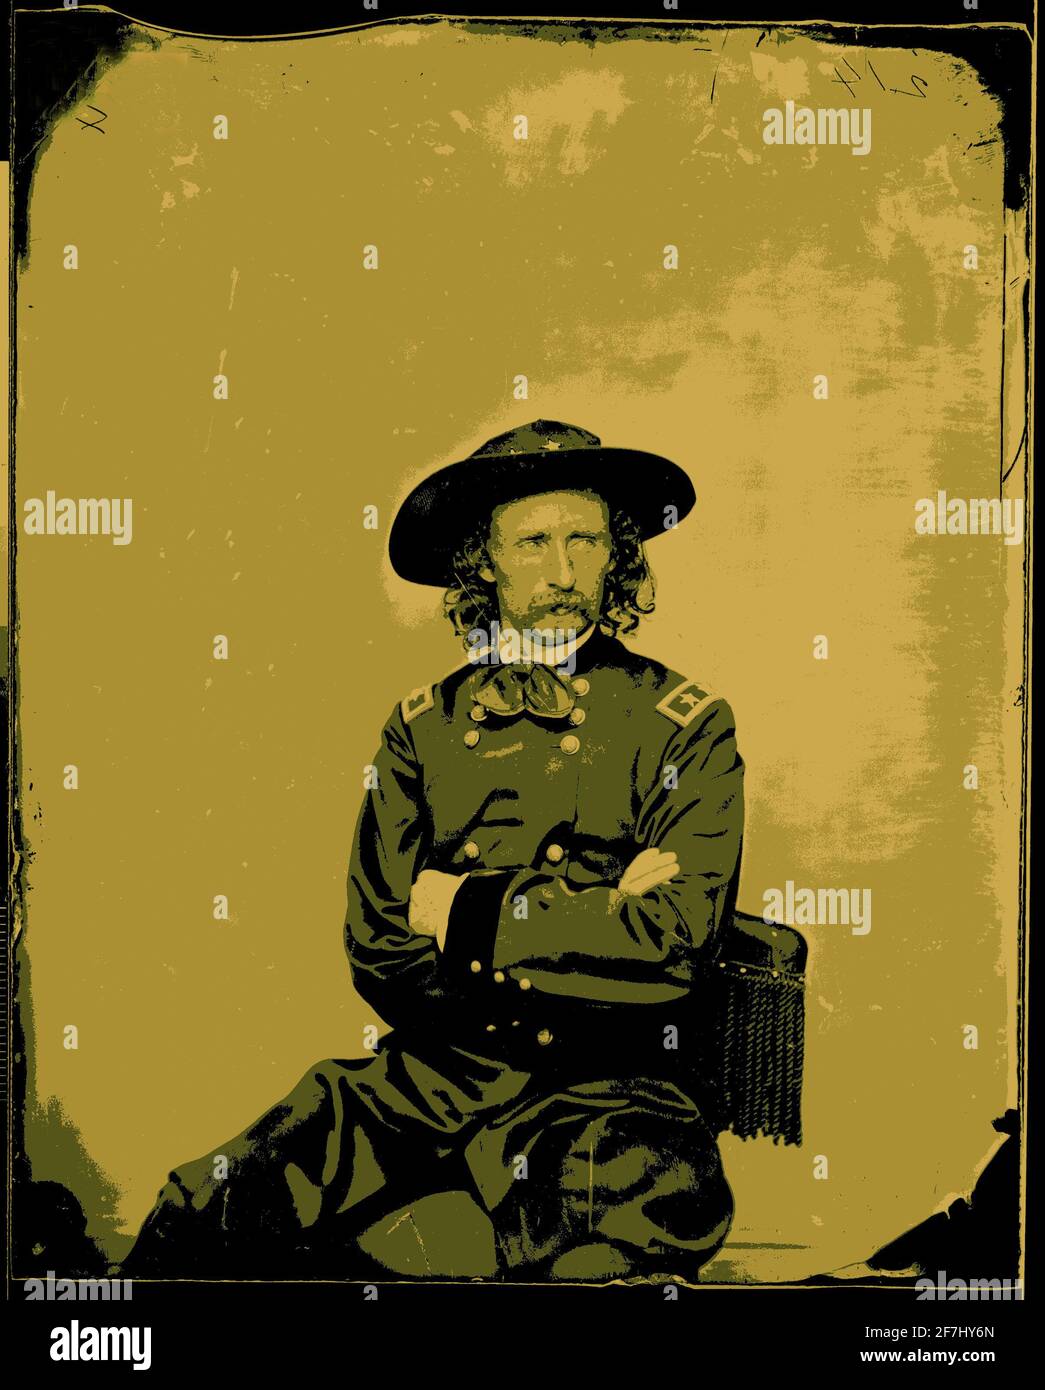 An 1885 photographic portrait of Major General George Armstrong Custer digitally colorized for artistic effect. Stock Photo